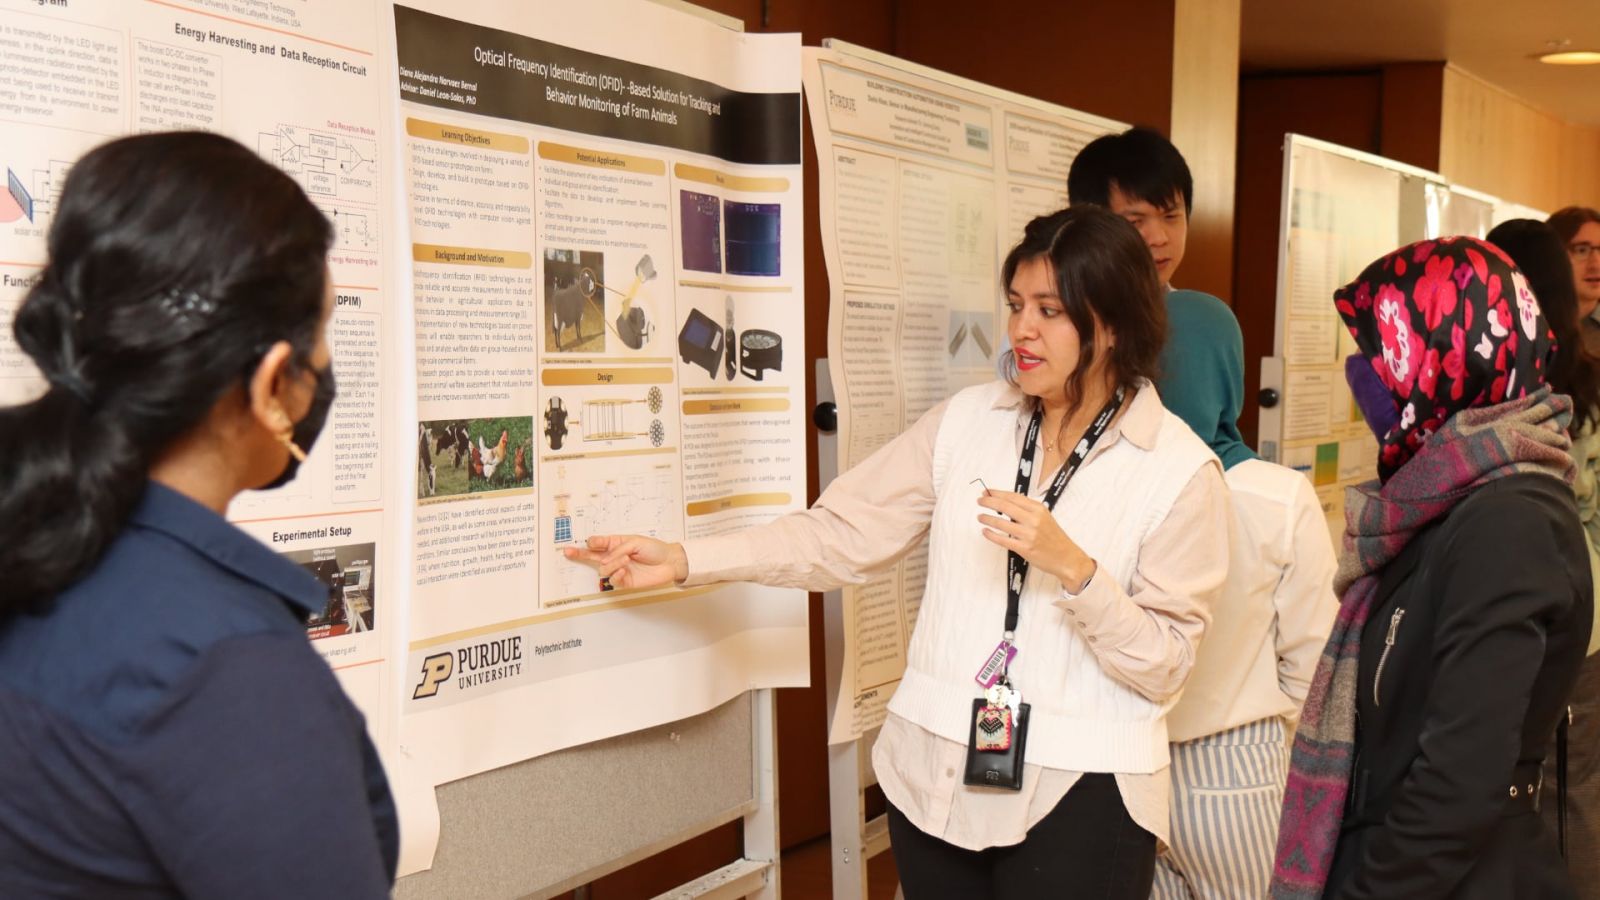 Undergraduate and graduate students in Purdue University’s Polytechnic Institute recently presented posters summarizing their 2021-2022 research projects at Stewart Center. (Purdue University photo/John O'Malley)